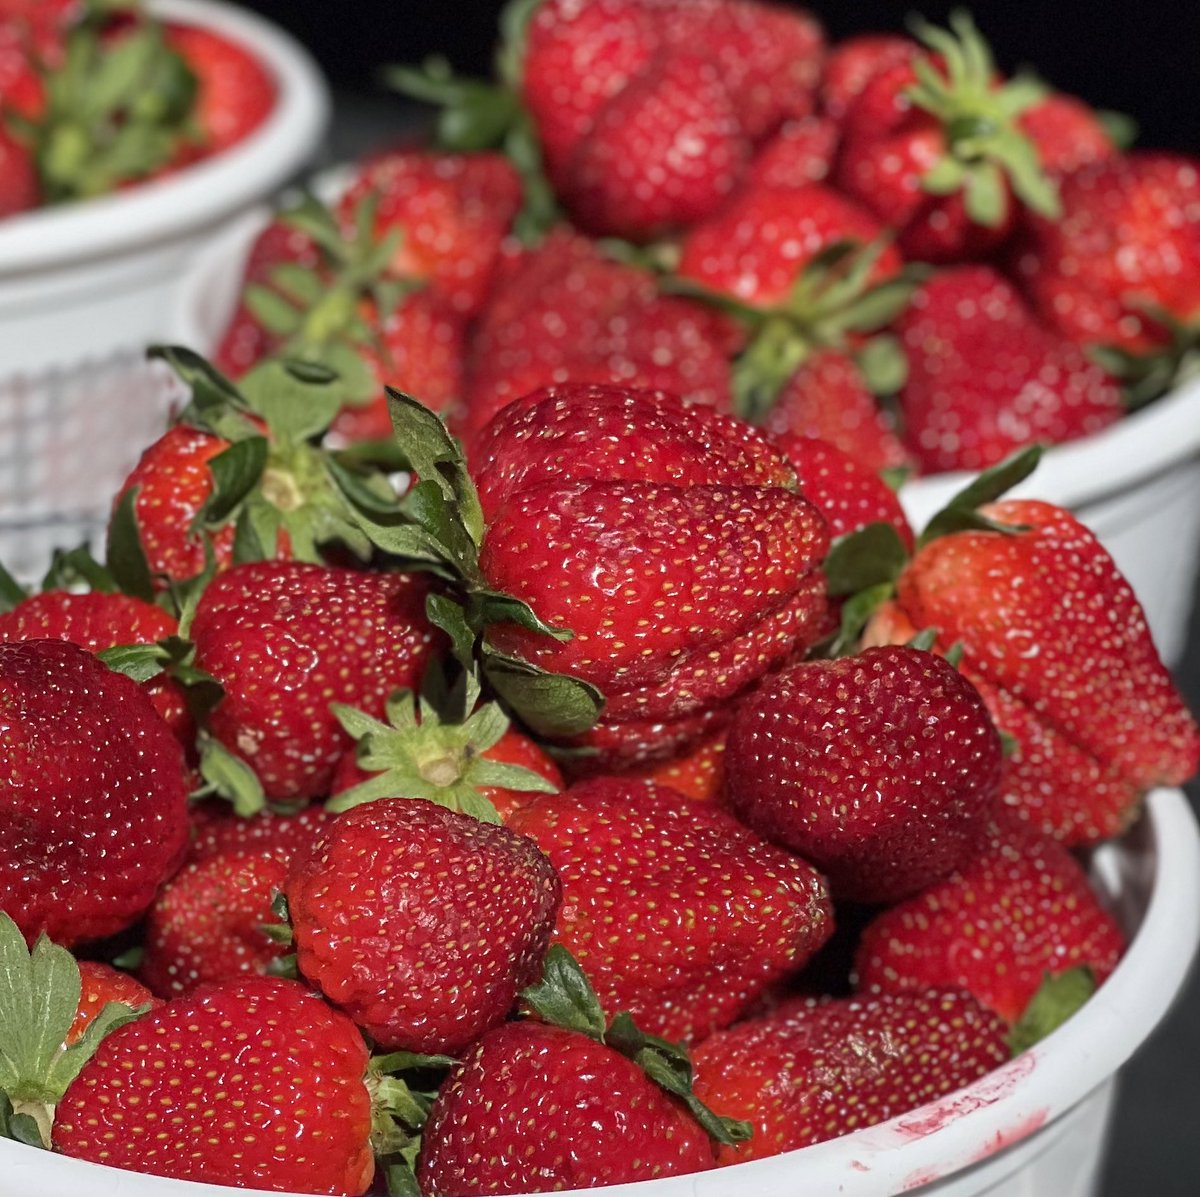 Happy Friday! Mouth watering and the smell intoxicating.🍓 Absolutely run on over to your favorite Market on the Westside. We welcome you until 6pm today. #floralparkmarket